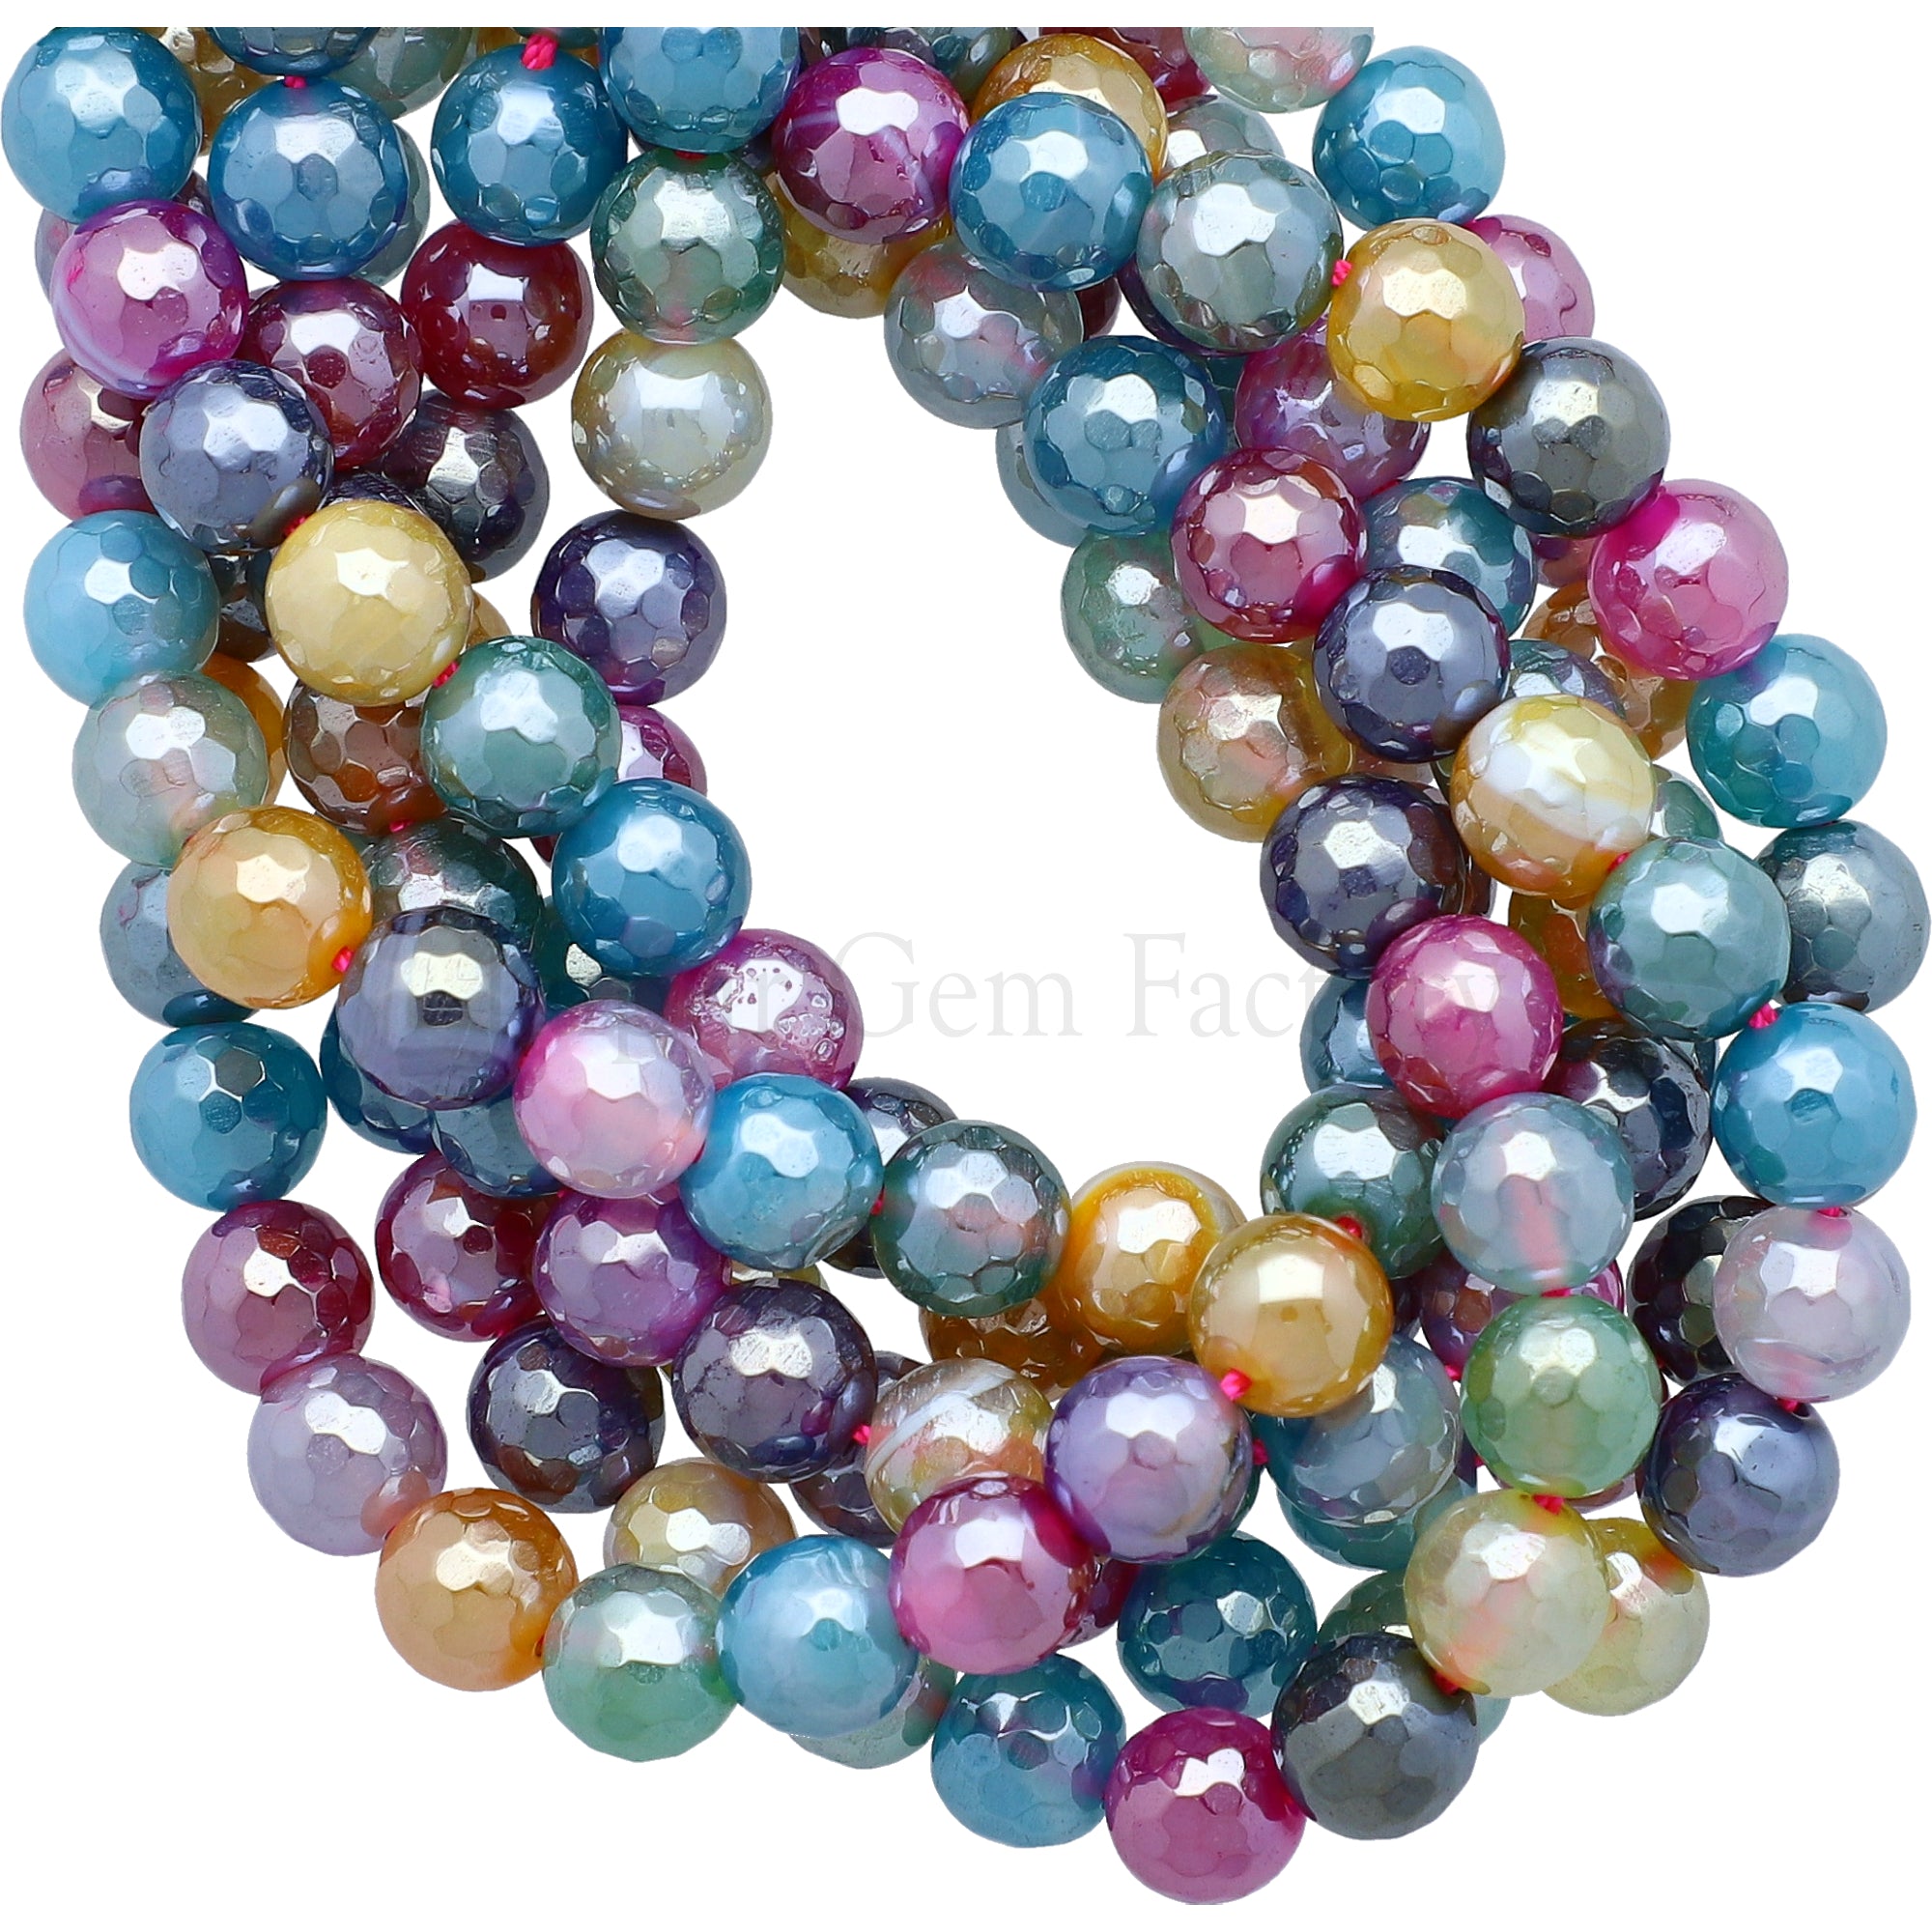 8 MM Mystic Coated Agate Faceted Round Beads 15 Inches Strand